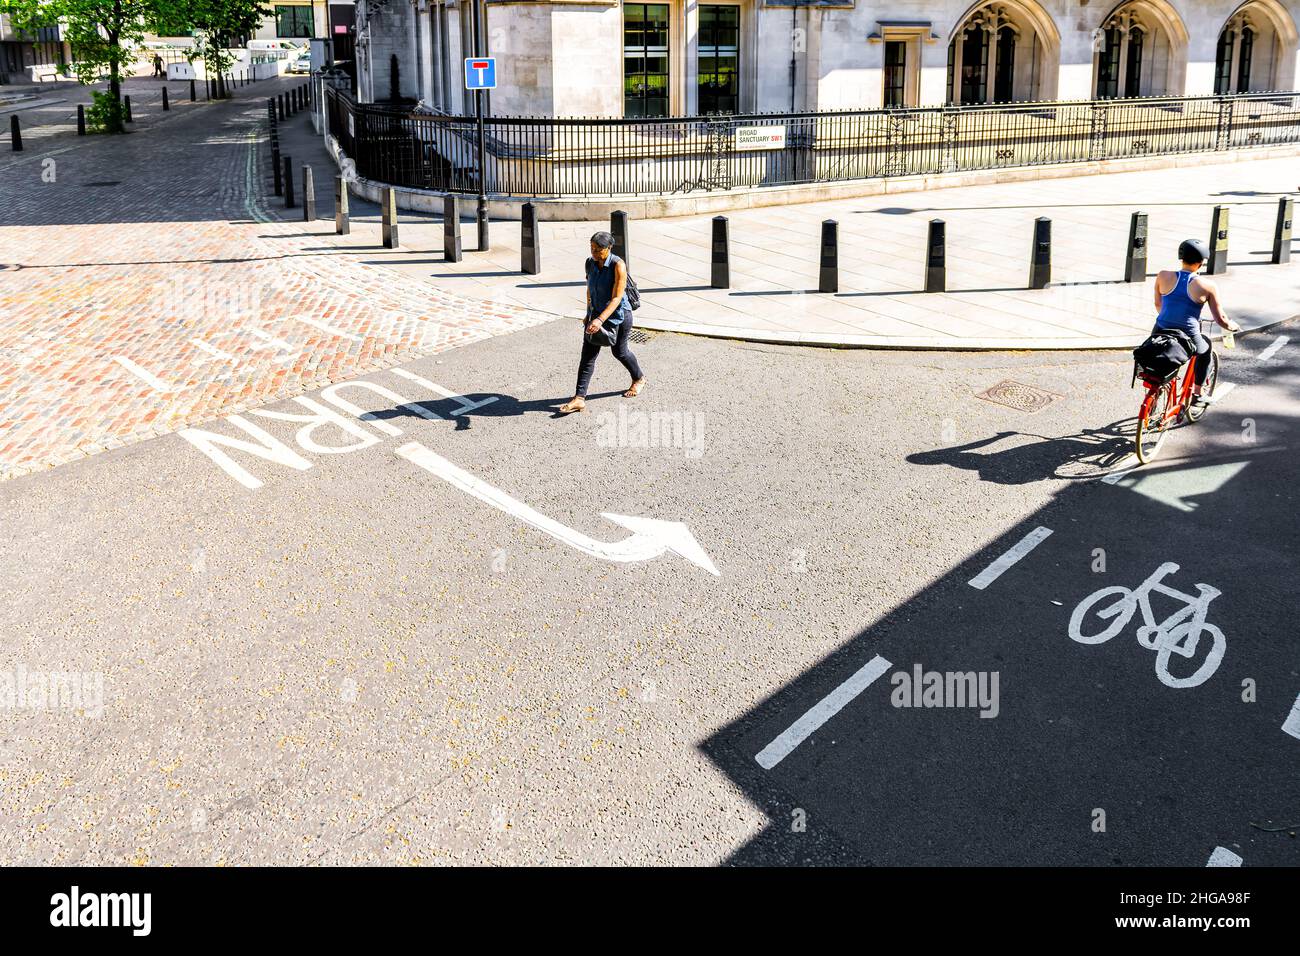 London, UK - June 22, 2018: High angle view on Royal Court of Justice in London with people walking on sidewalk pavement on sunny summer day Stock Photo